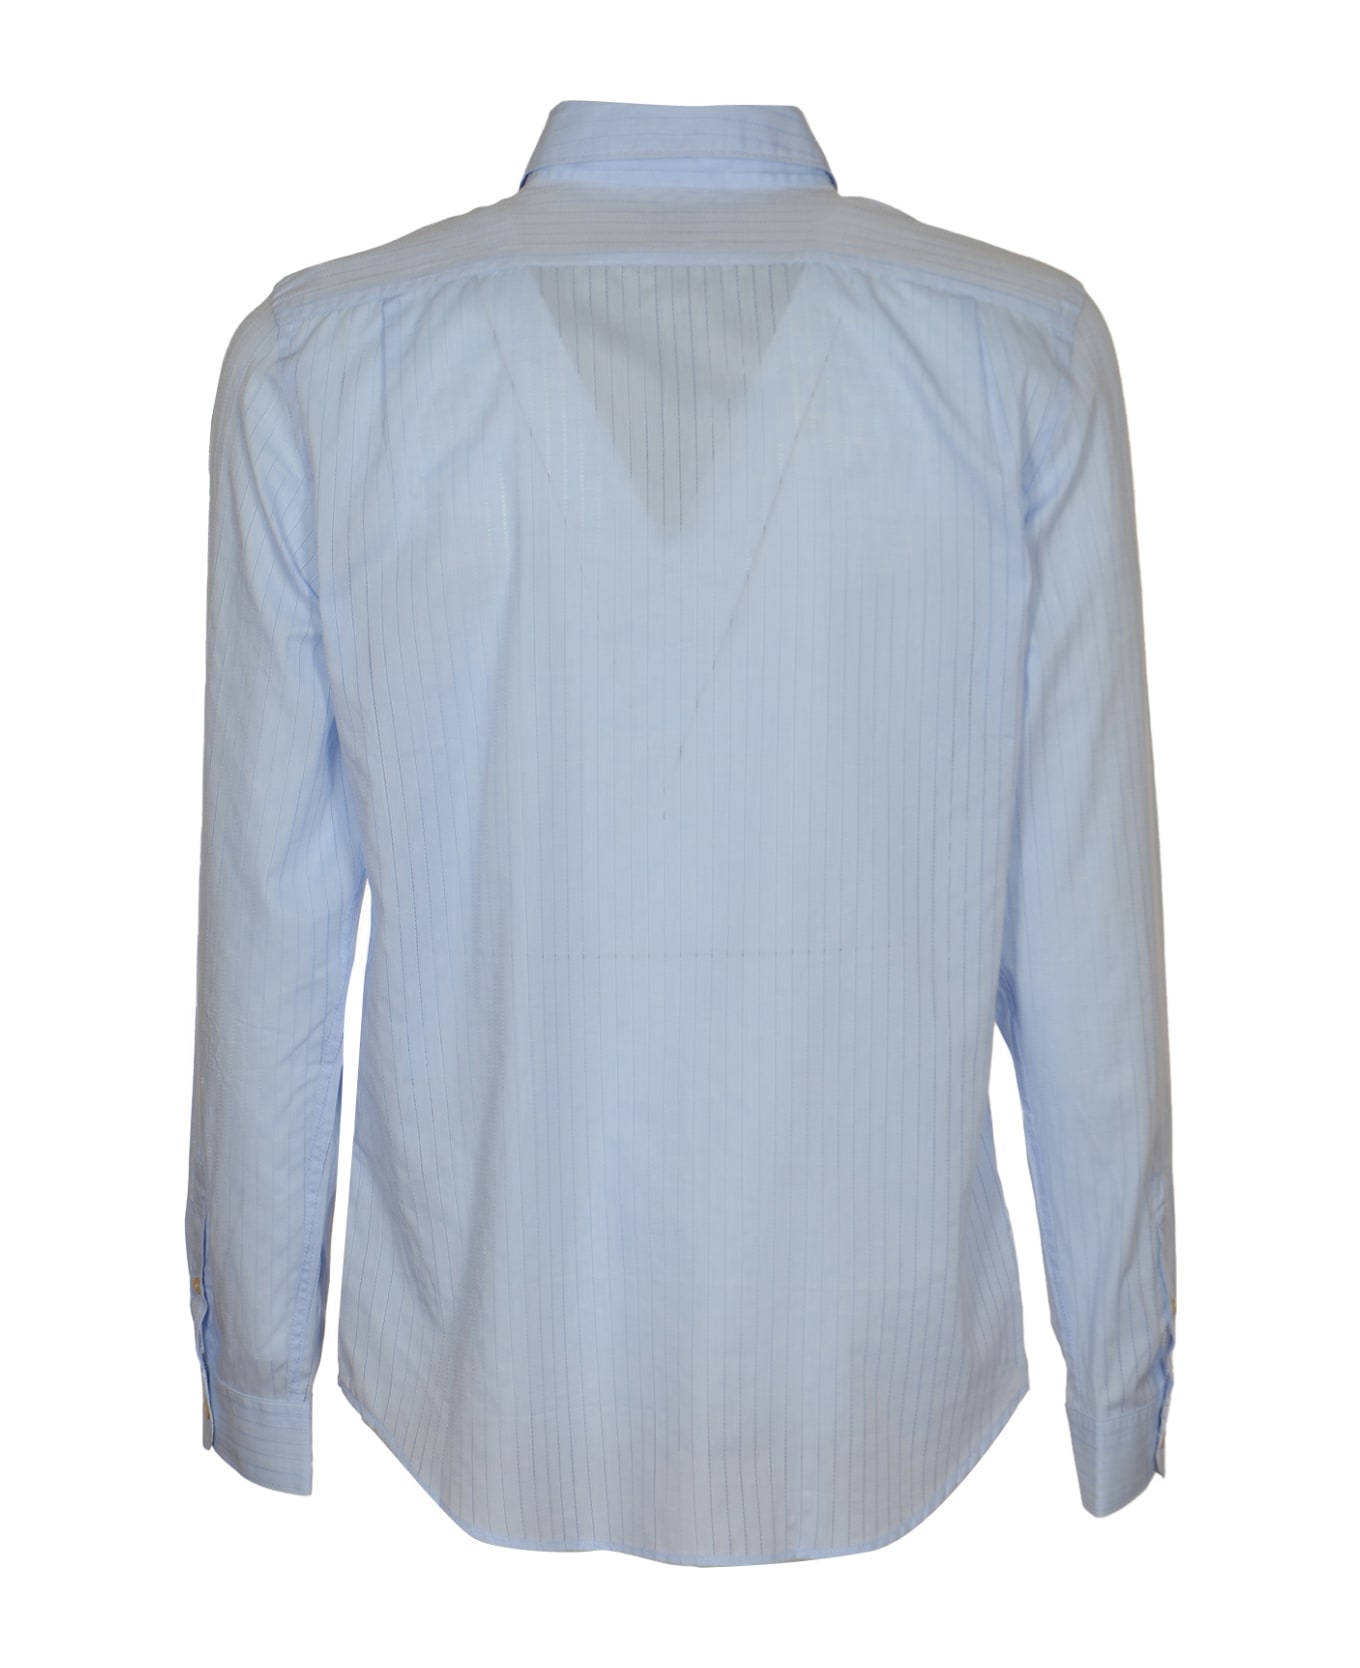 Paul Smith Mens Ls Tailored Fit Shirt - Blues シャツ